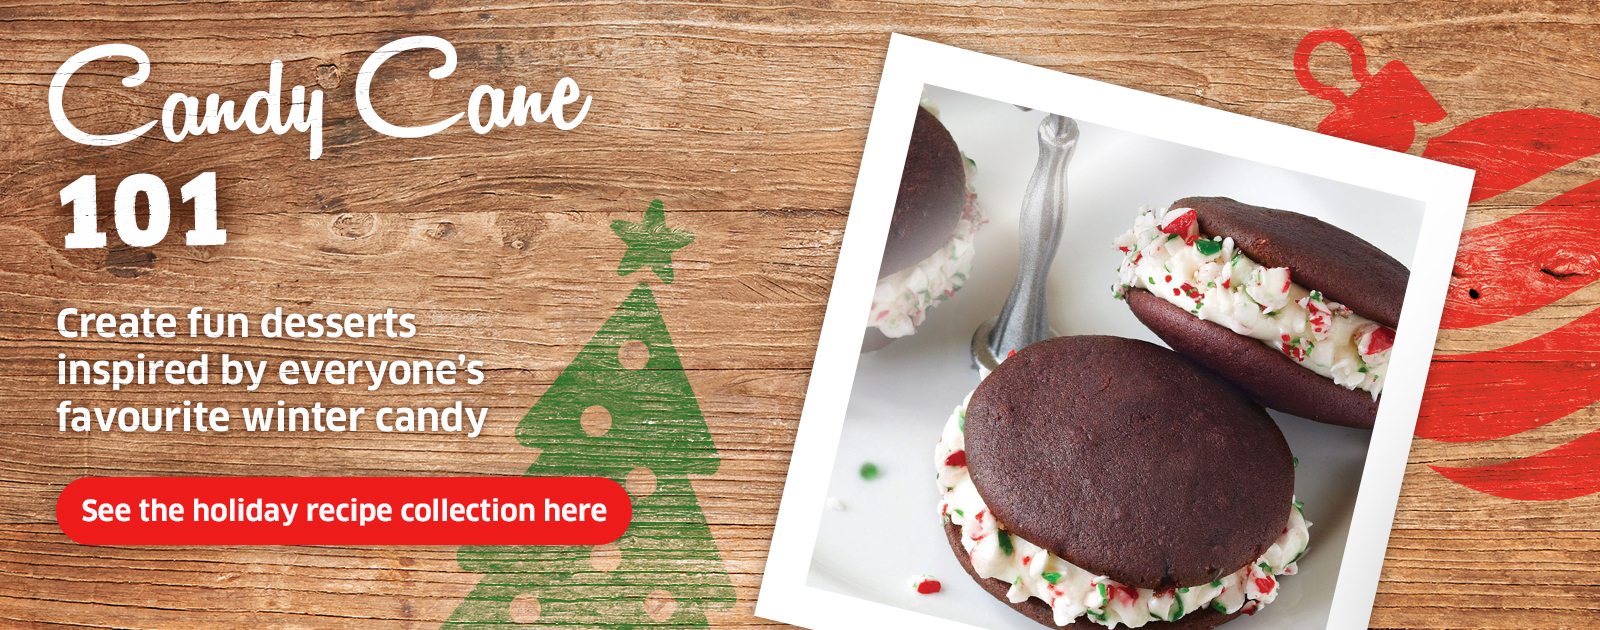 Text Reading 'Candy Cane 101. Create fun desserts inspired by everyone's favourite winter candy. 'See the holiday recipe collection here' by clicking the button below.'